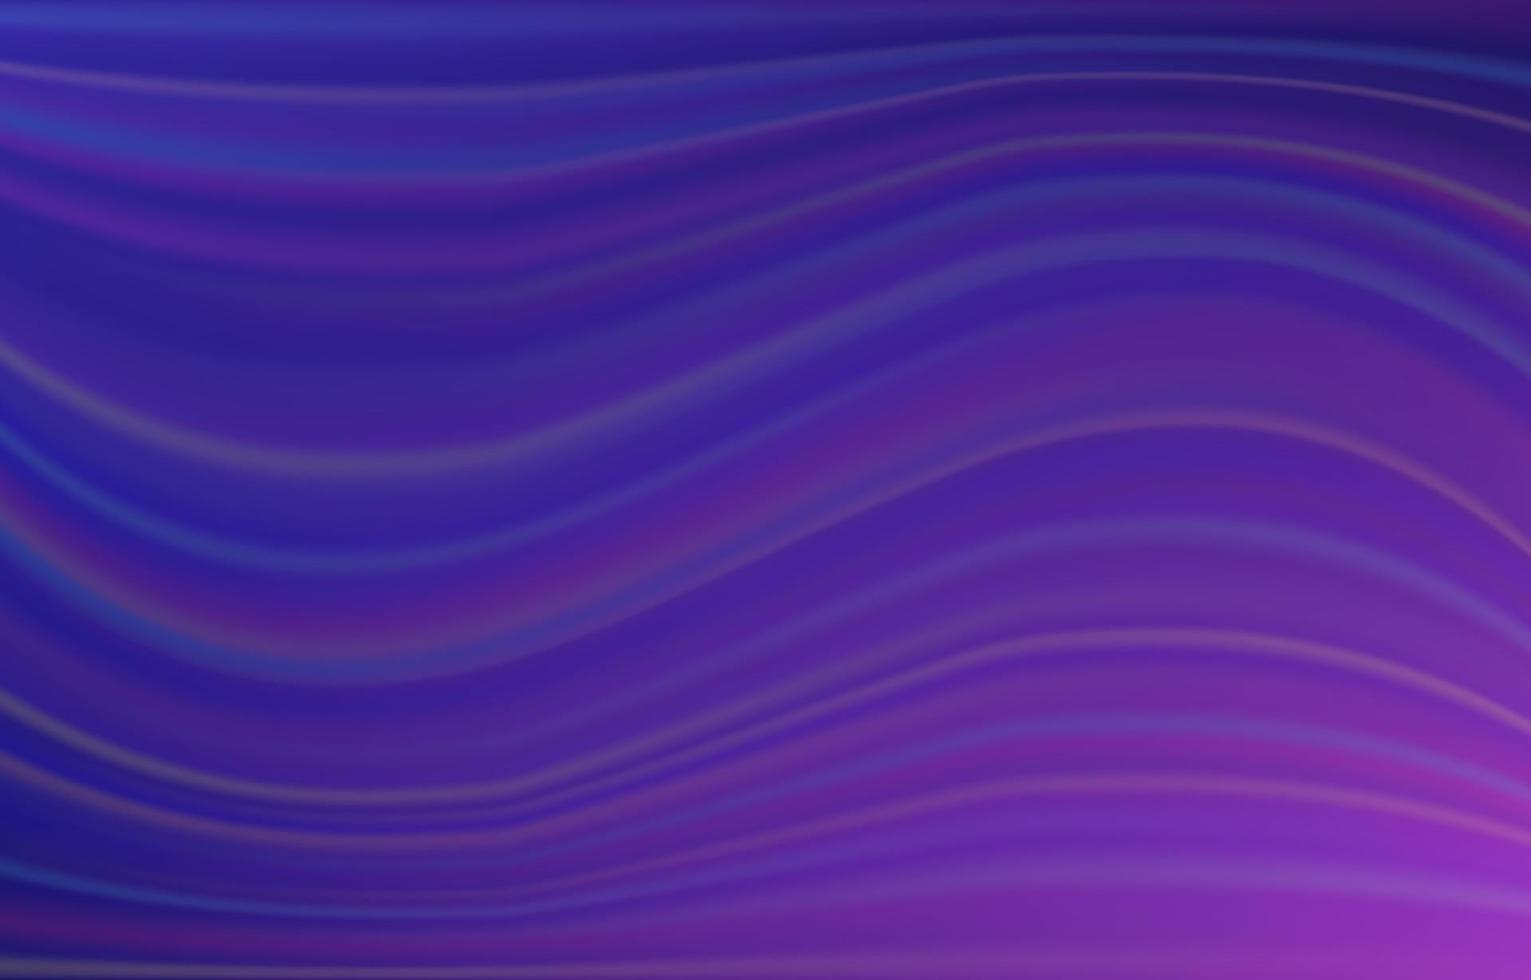 Abstract wavy lines on gradient background. Modern colorful waves flow shape art design for banner, poster, project, display, website, social media. Vector illustration.